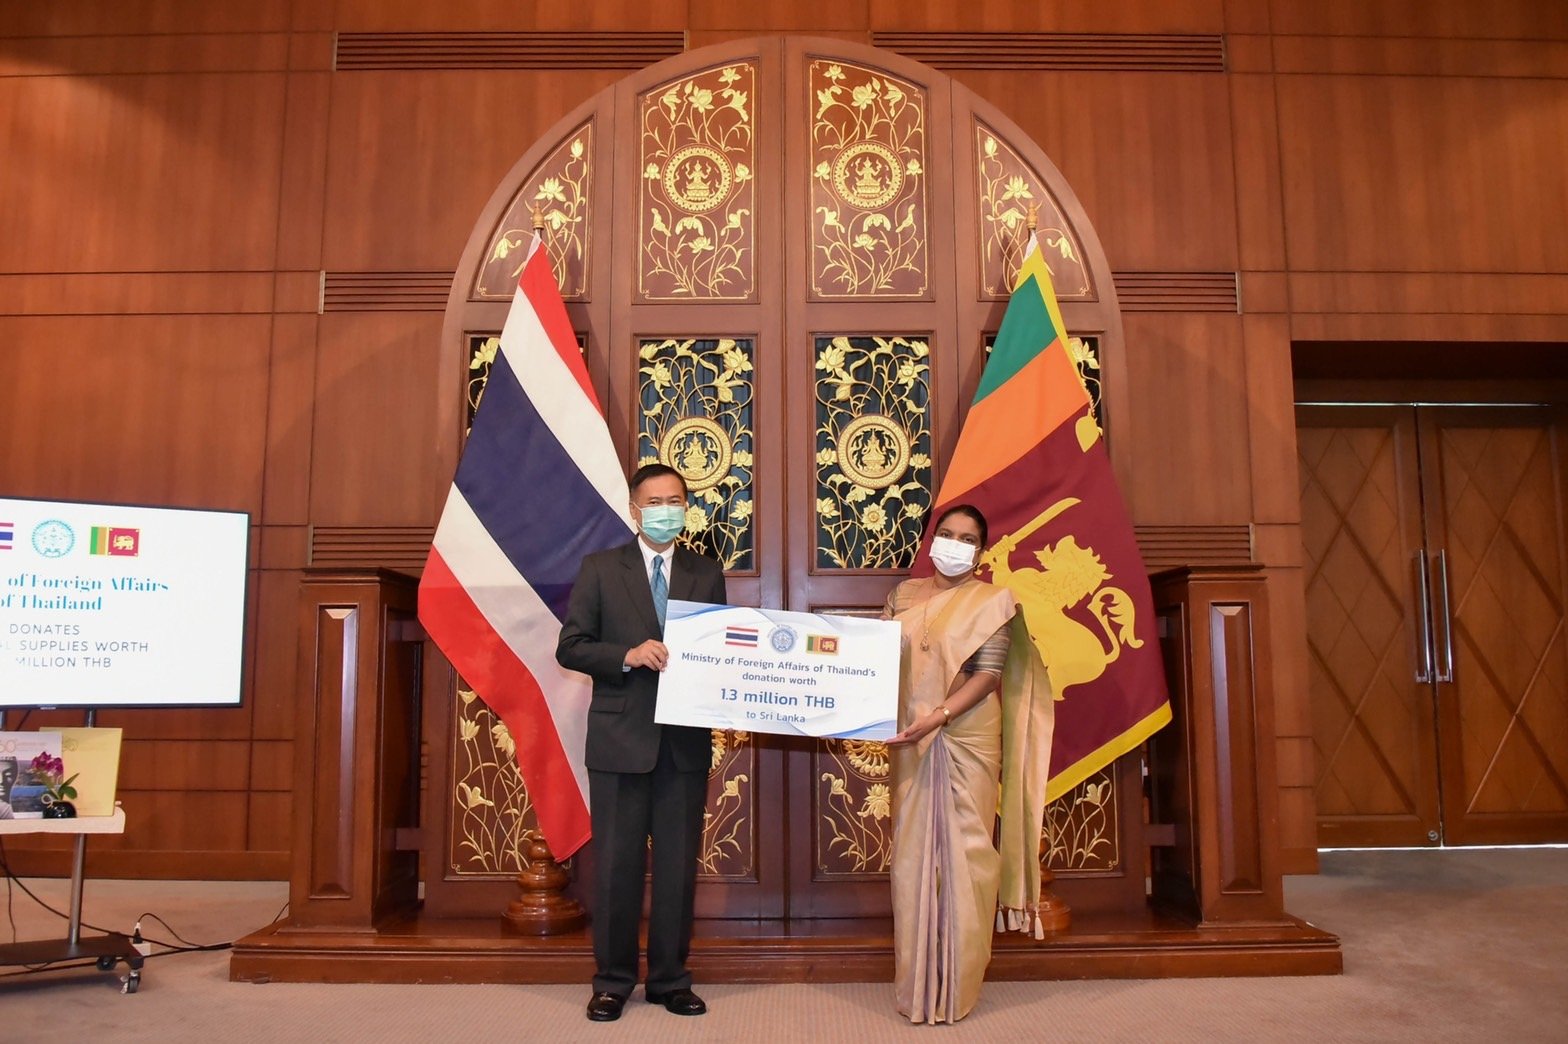 On 3 August 2022, H.E. Mr. Vijavat Isarabhakdi, Vice Minister for Foreign Affairs, presided over the handover ceremony of donations to Sri Lanka